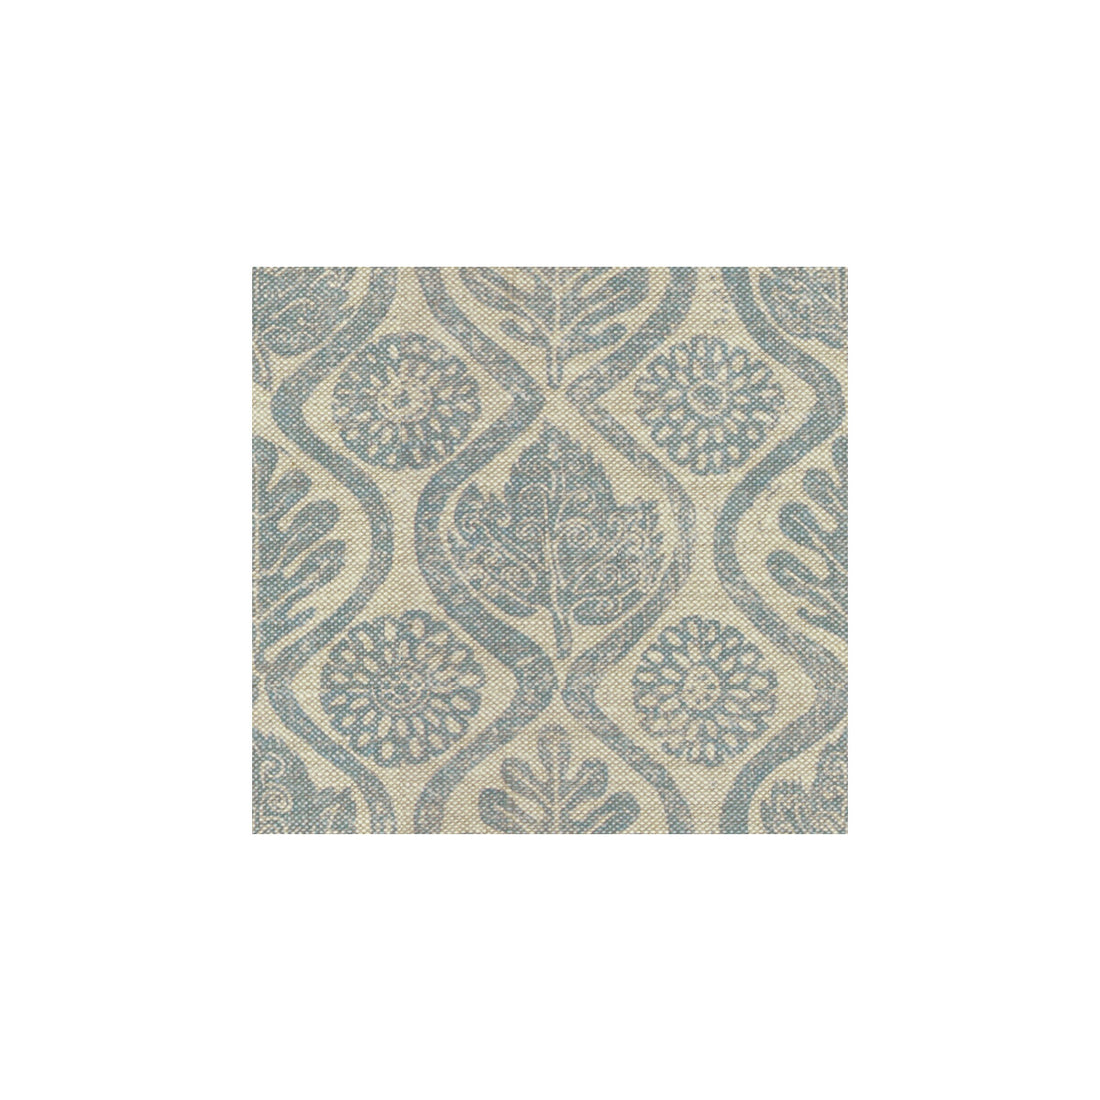 Oakleaves fabric in blue/oatmeal color - pattern BFC-3515.15.0 - by Lee Jofa in the Blithfield collection